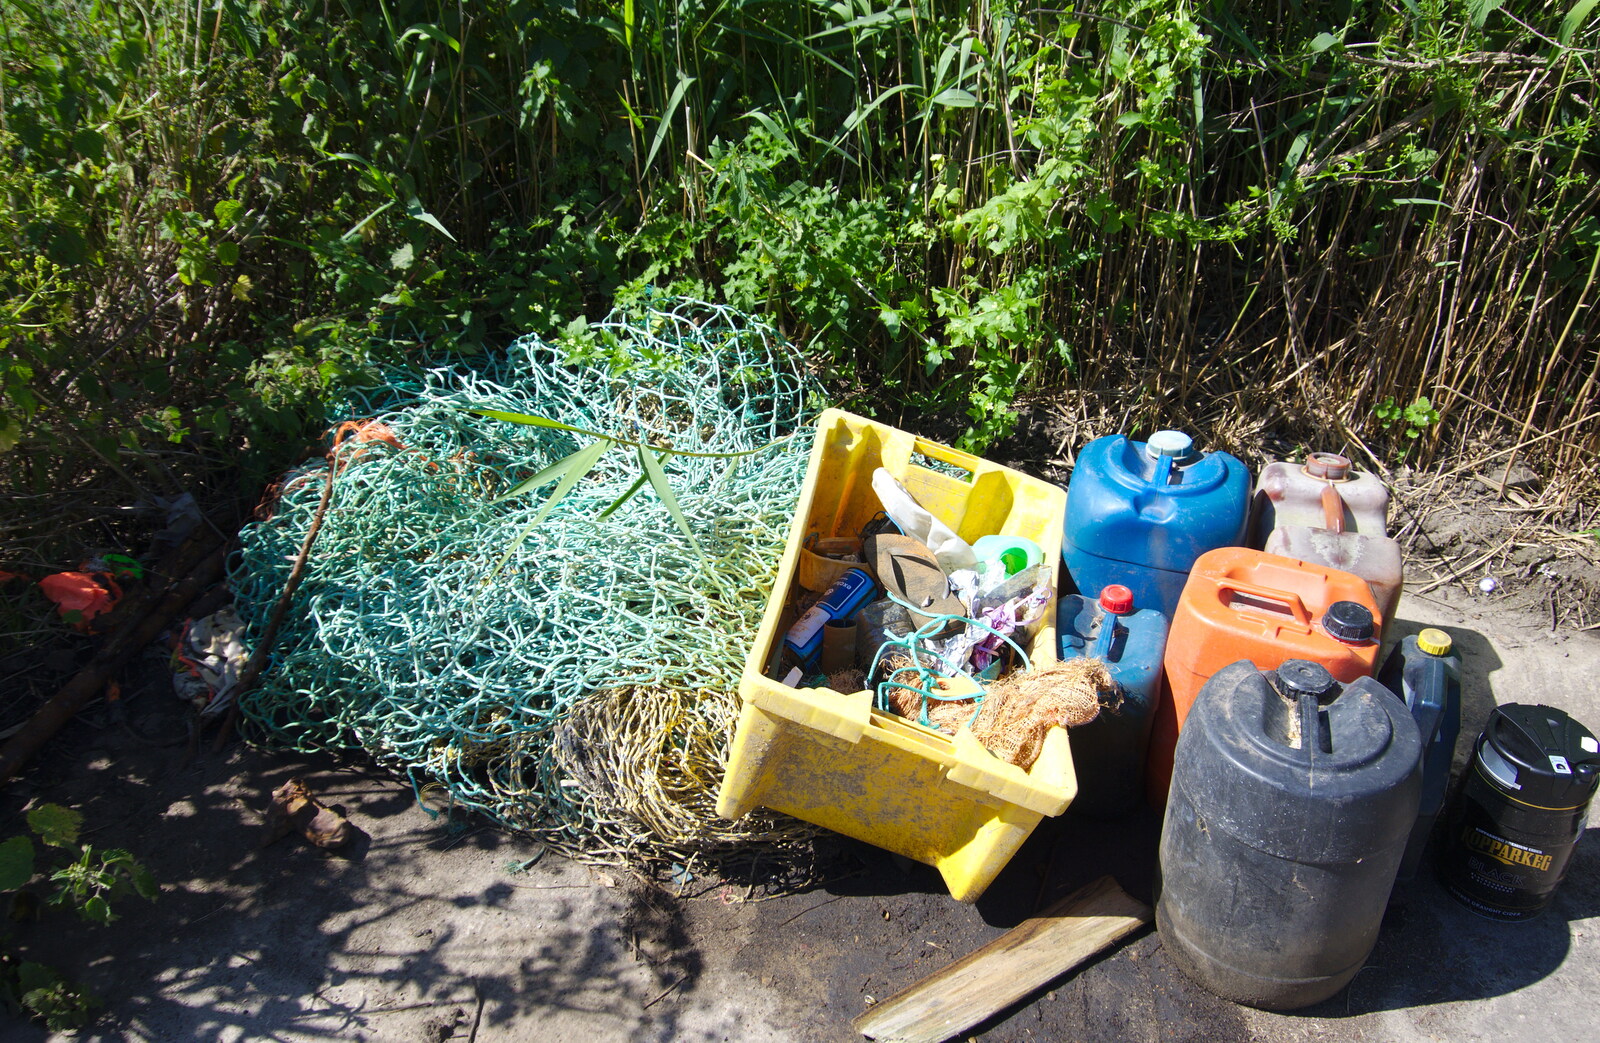 A random collection of junk from Cliff House Camping, Dunwich, Suffolk - 15th June 2019